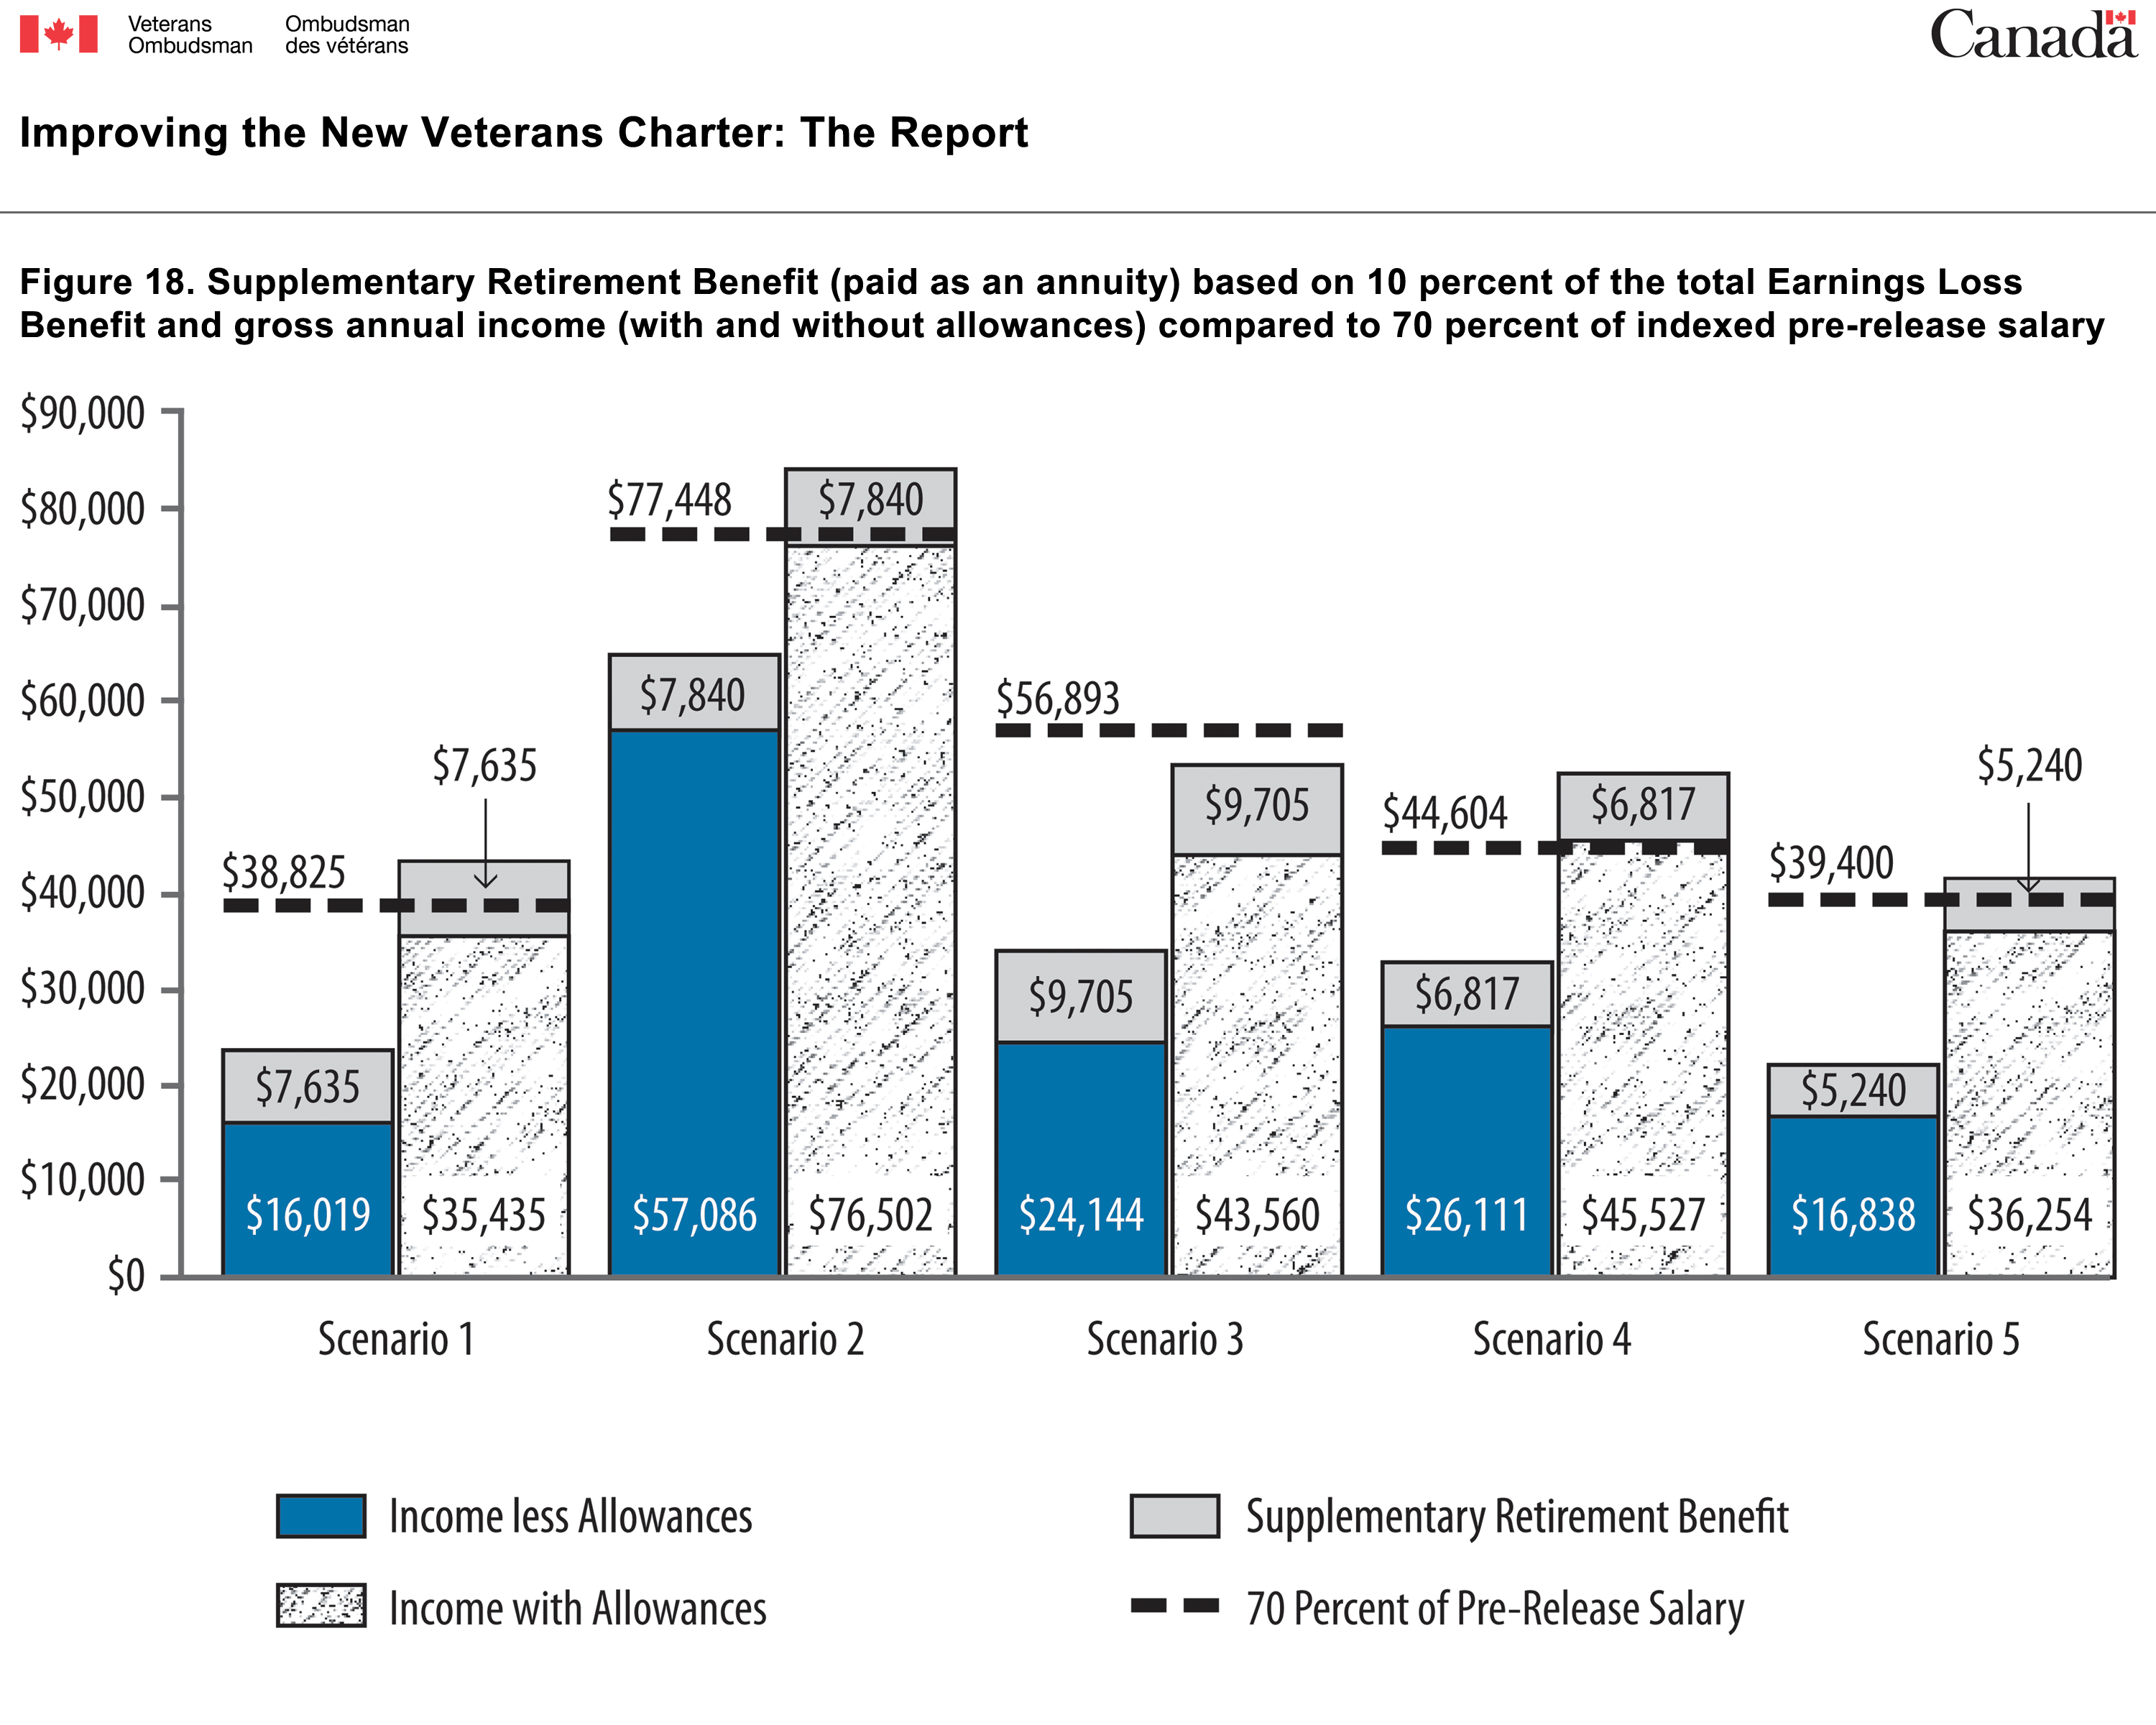 Figure 18. Supplementary  Retirement Benefit (paid as an annuity) based on 10 percent of the total  Earnings Loss Benefit and gross annual income (with and without allowances)  compared to 70 percent of indexed pre-release salary